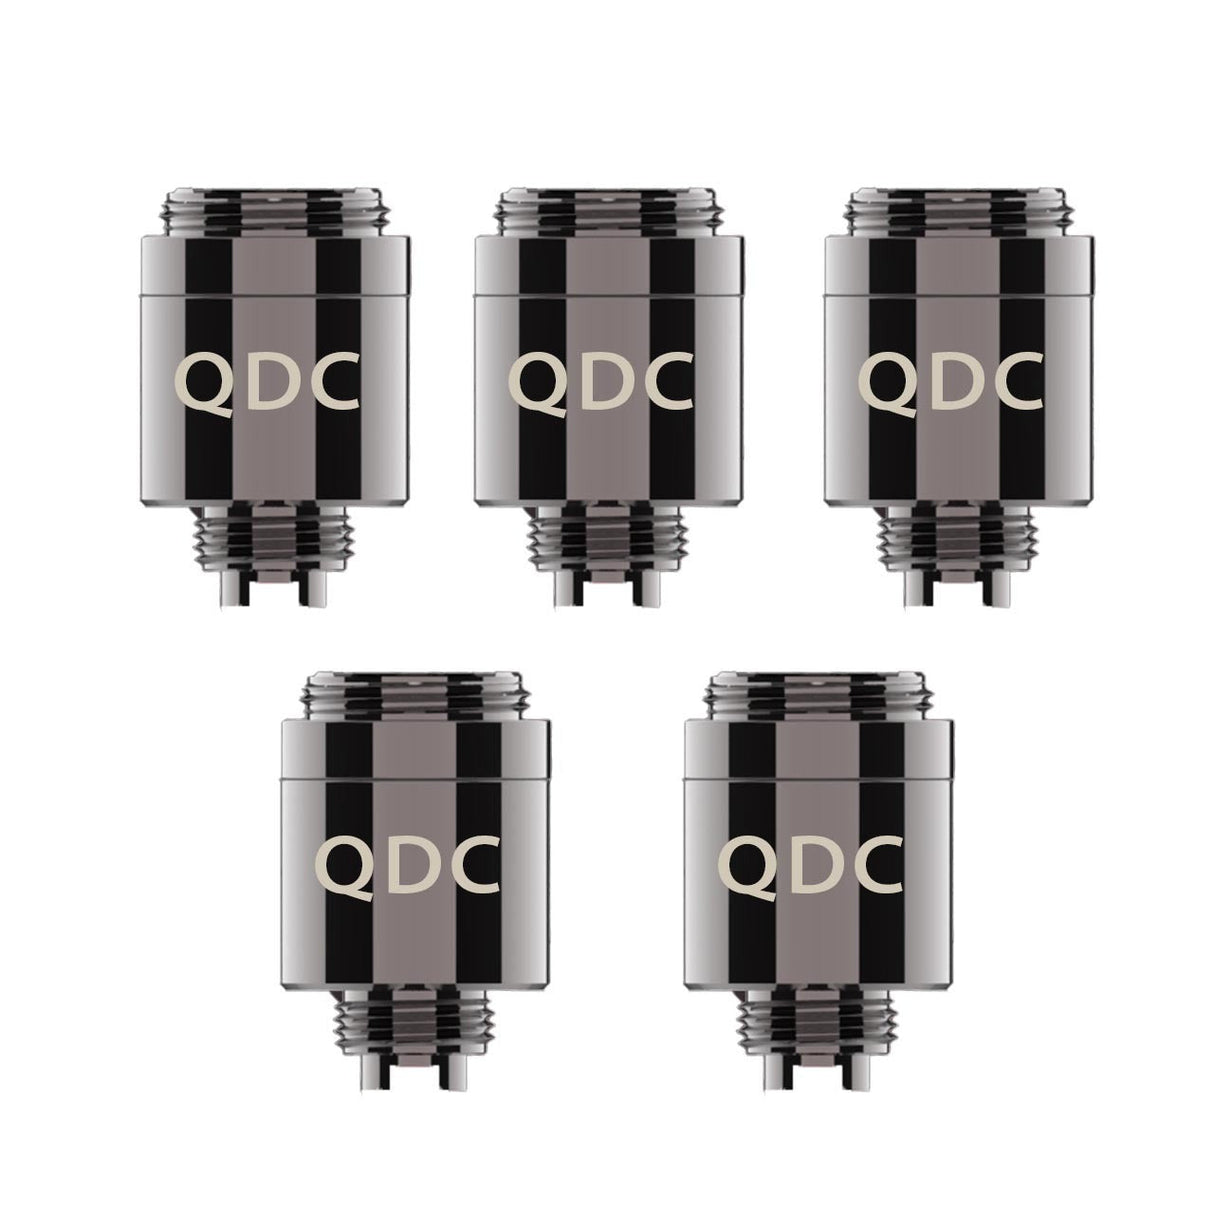 Yocan Armor Quartz Dual Coil 5-pack for vaporizers, portable e-nail design, front view on white